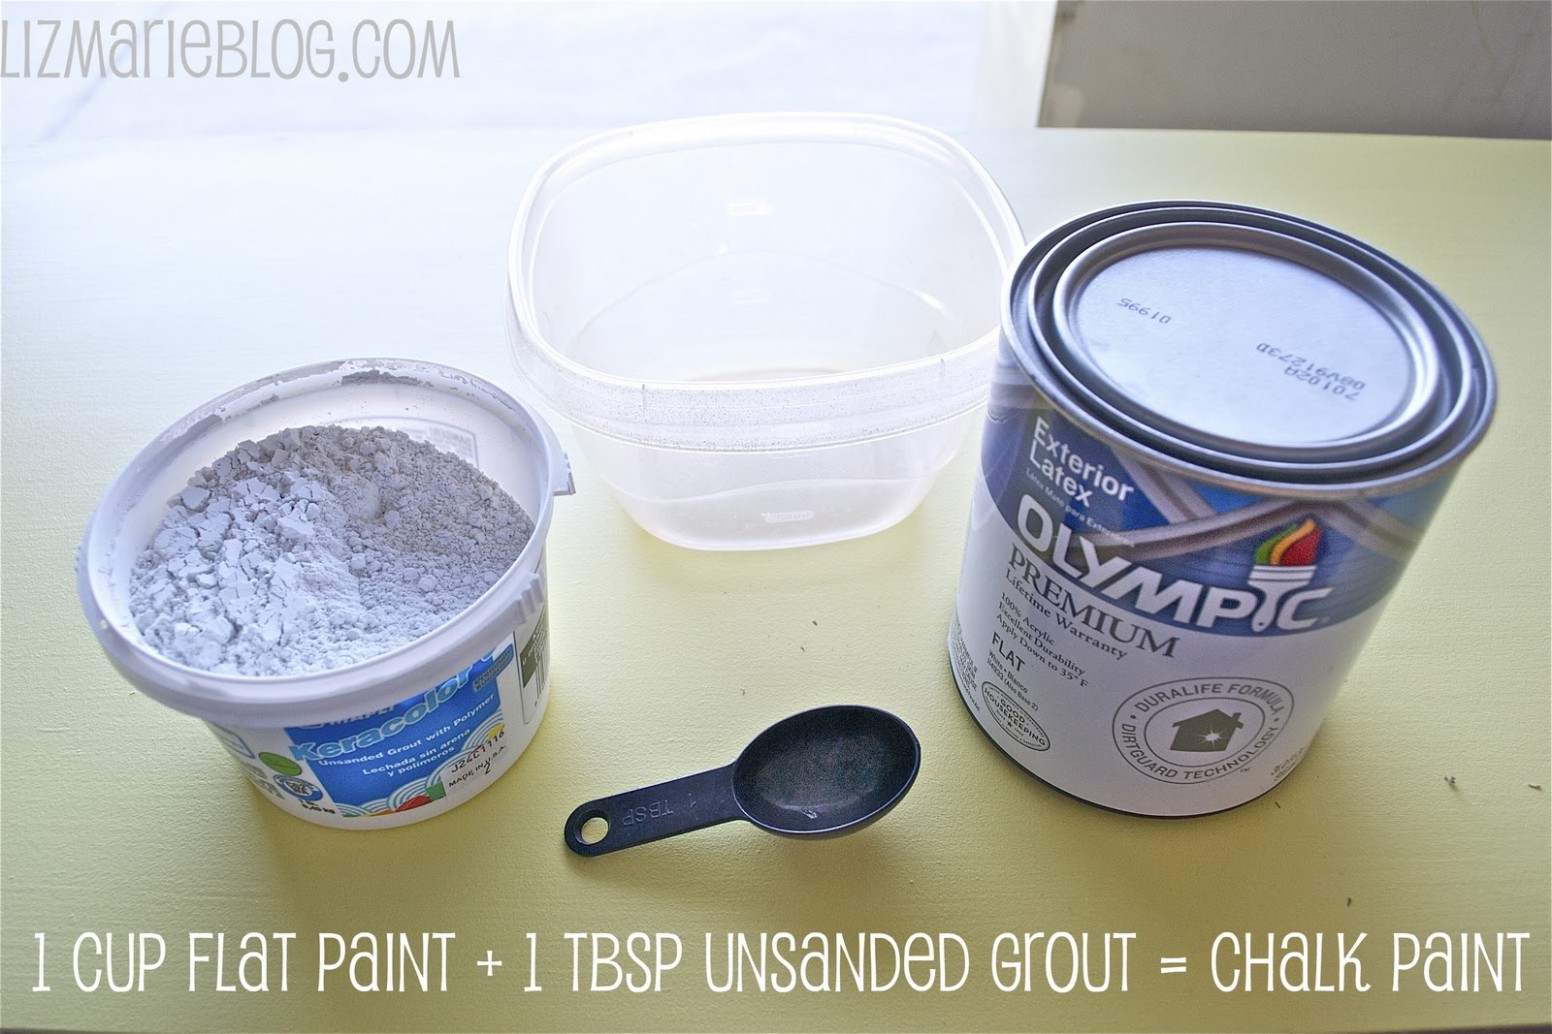 Homemade Chalk Paint Can You Make Chalk Paint With Acrylic Paint